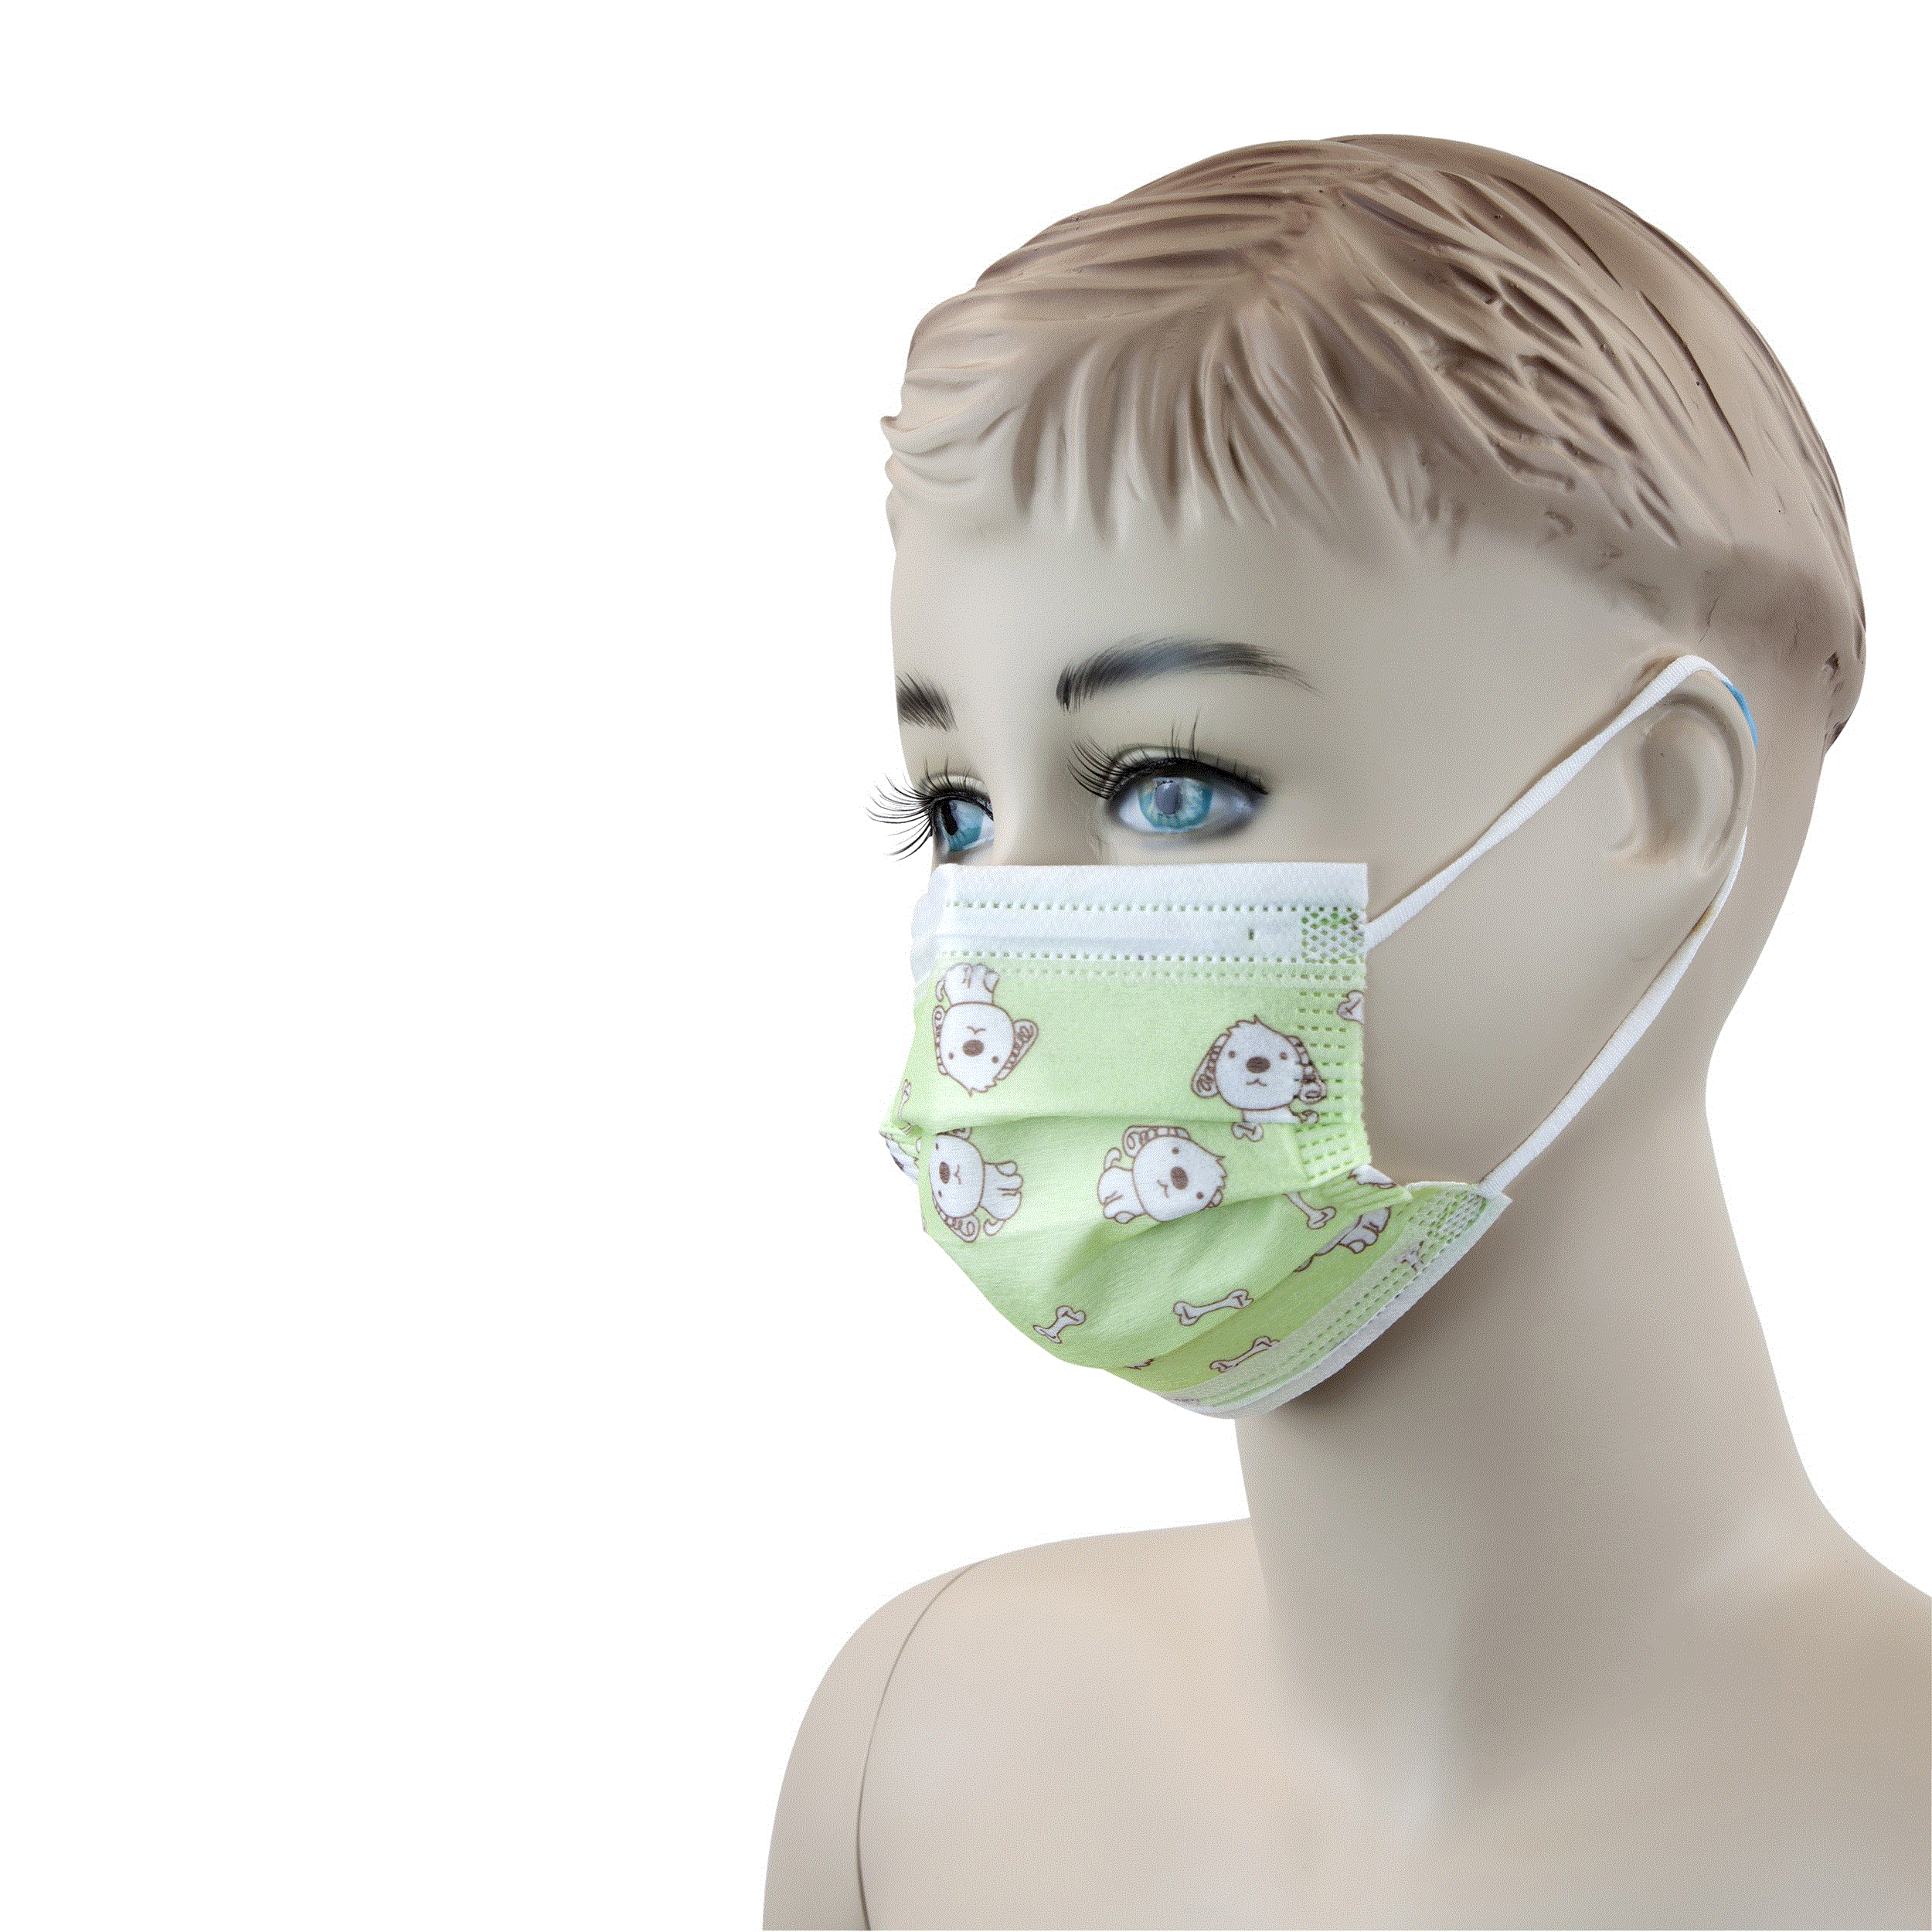 Pediatric Face Masks Products, Supplies and Equipment